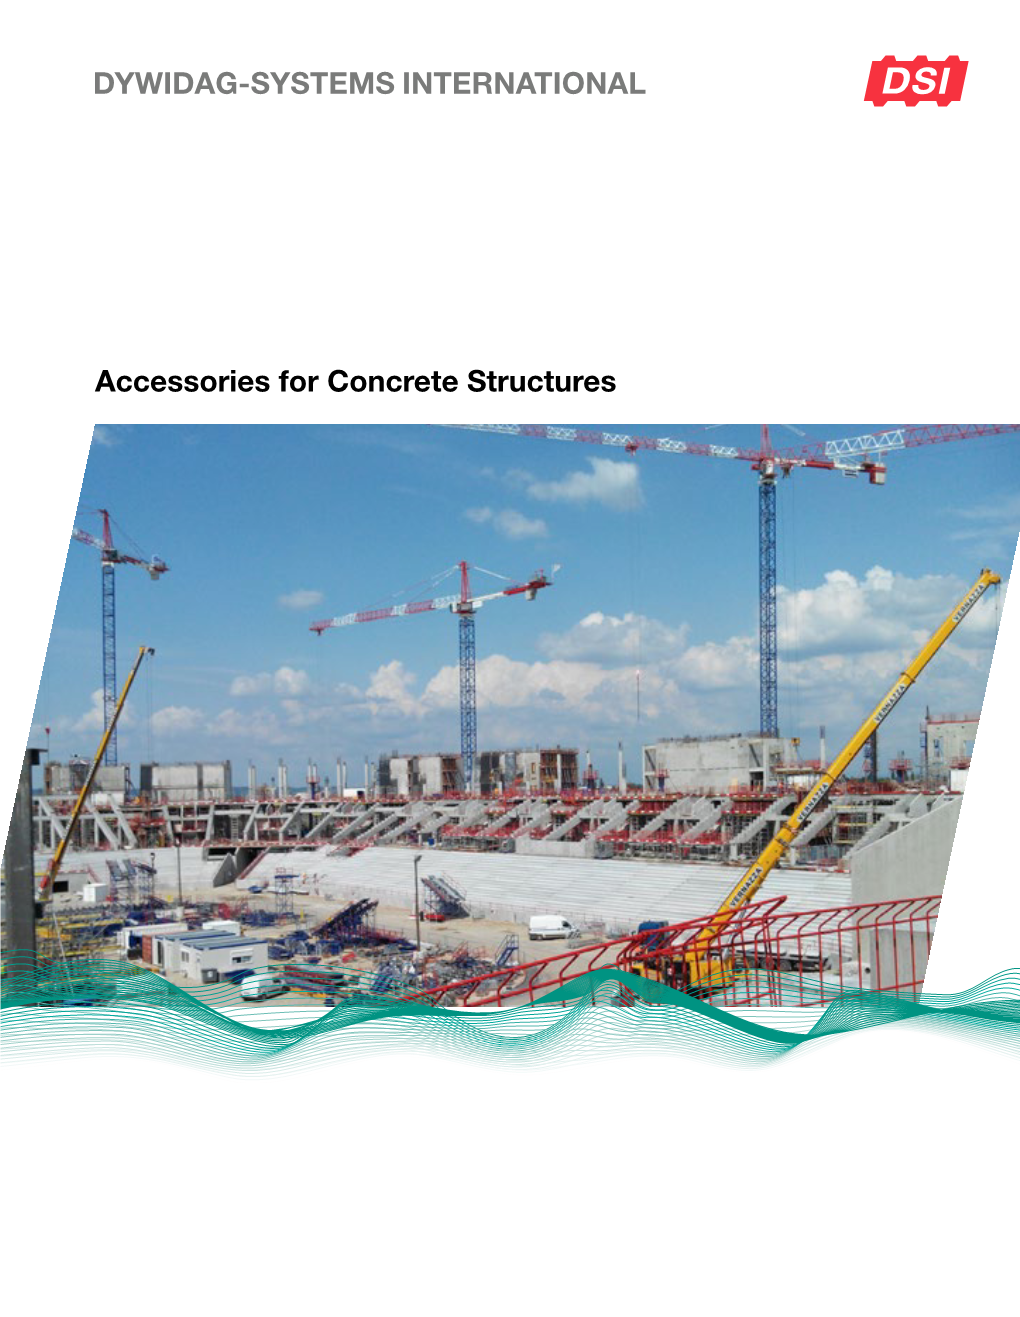 Accessories for Concrete Structures